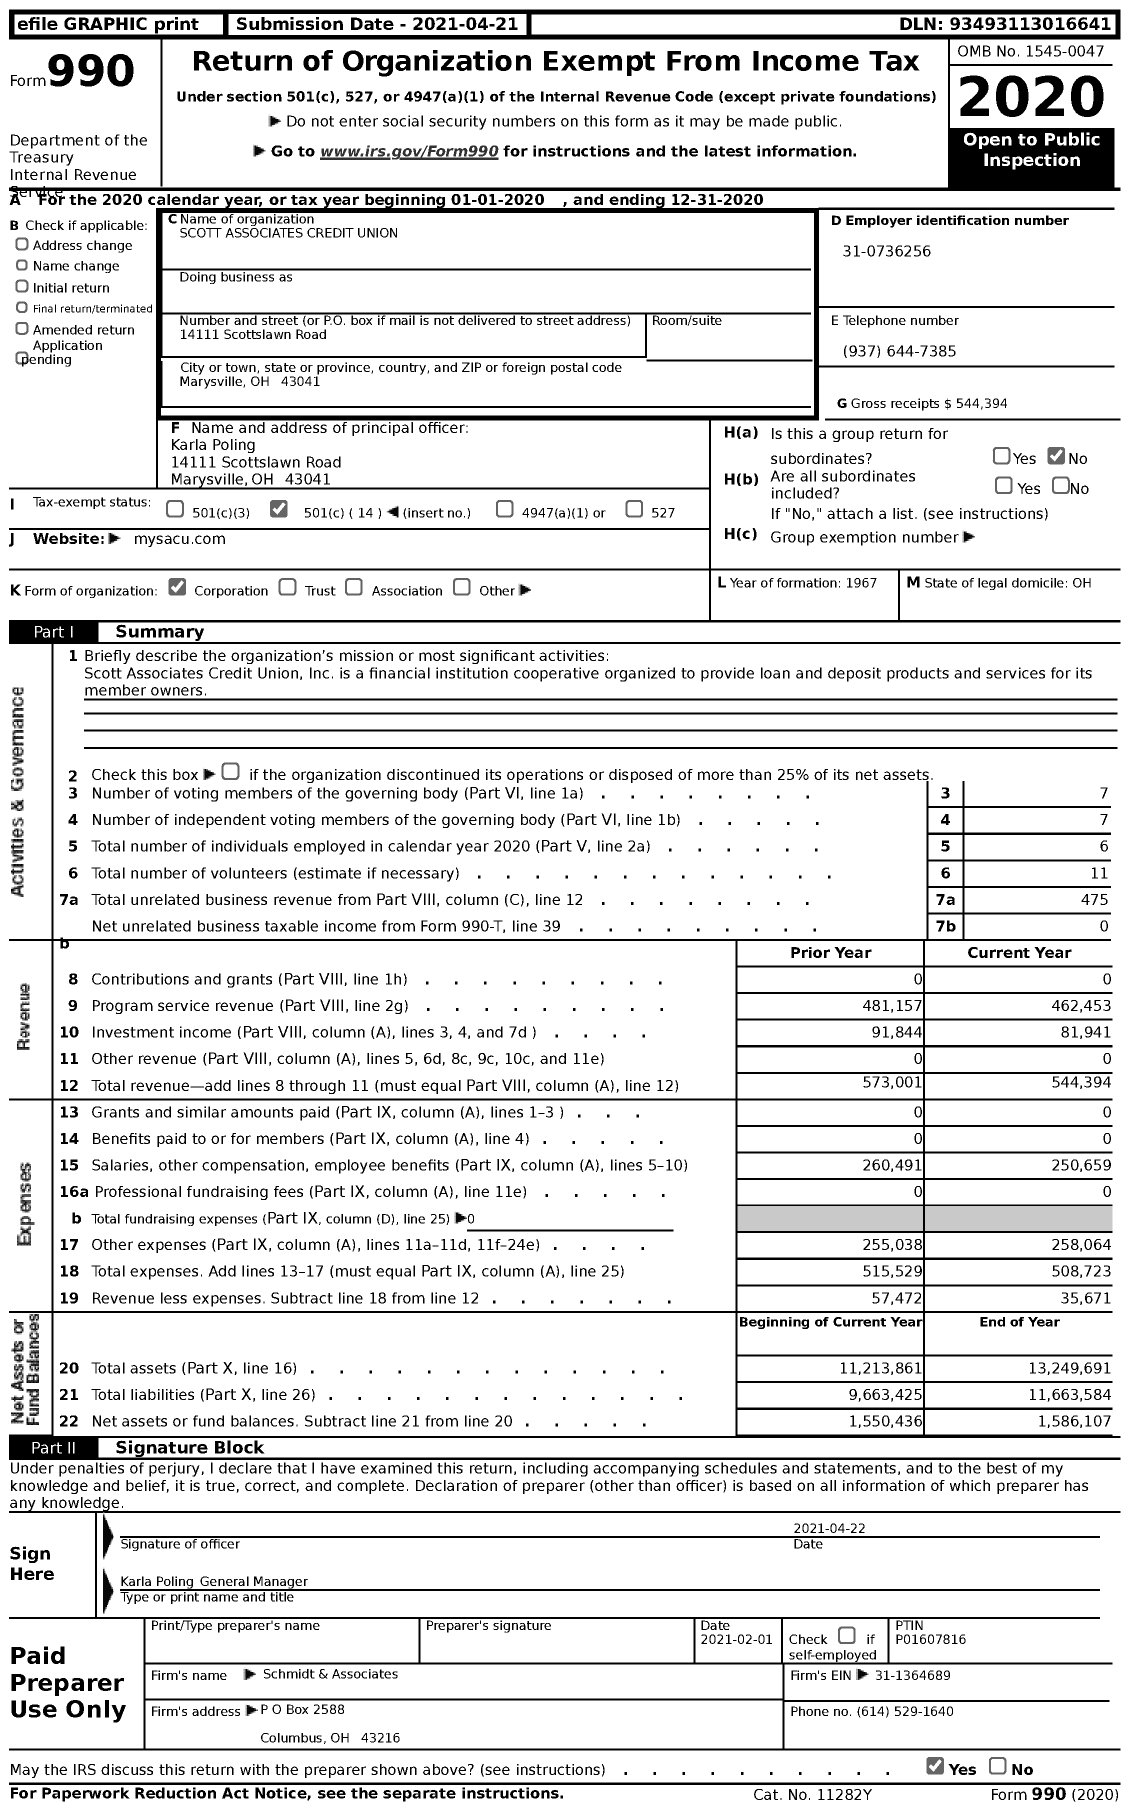 Image of first page of 2020 Form 990 for 1158 Scott Associates Credit Union